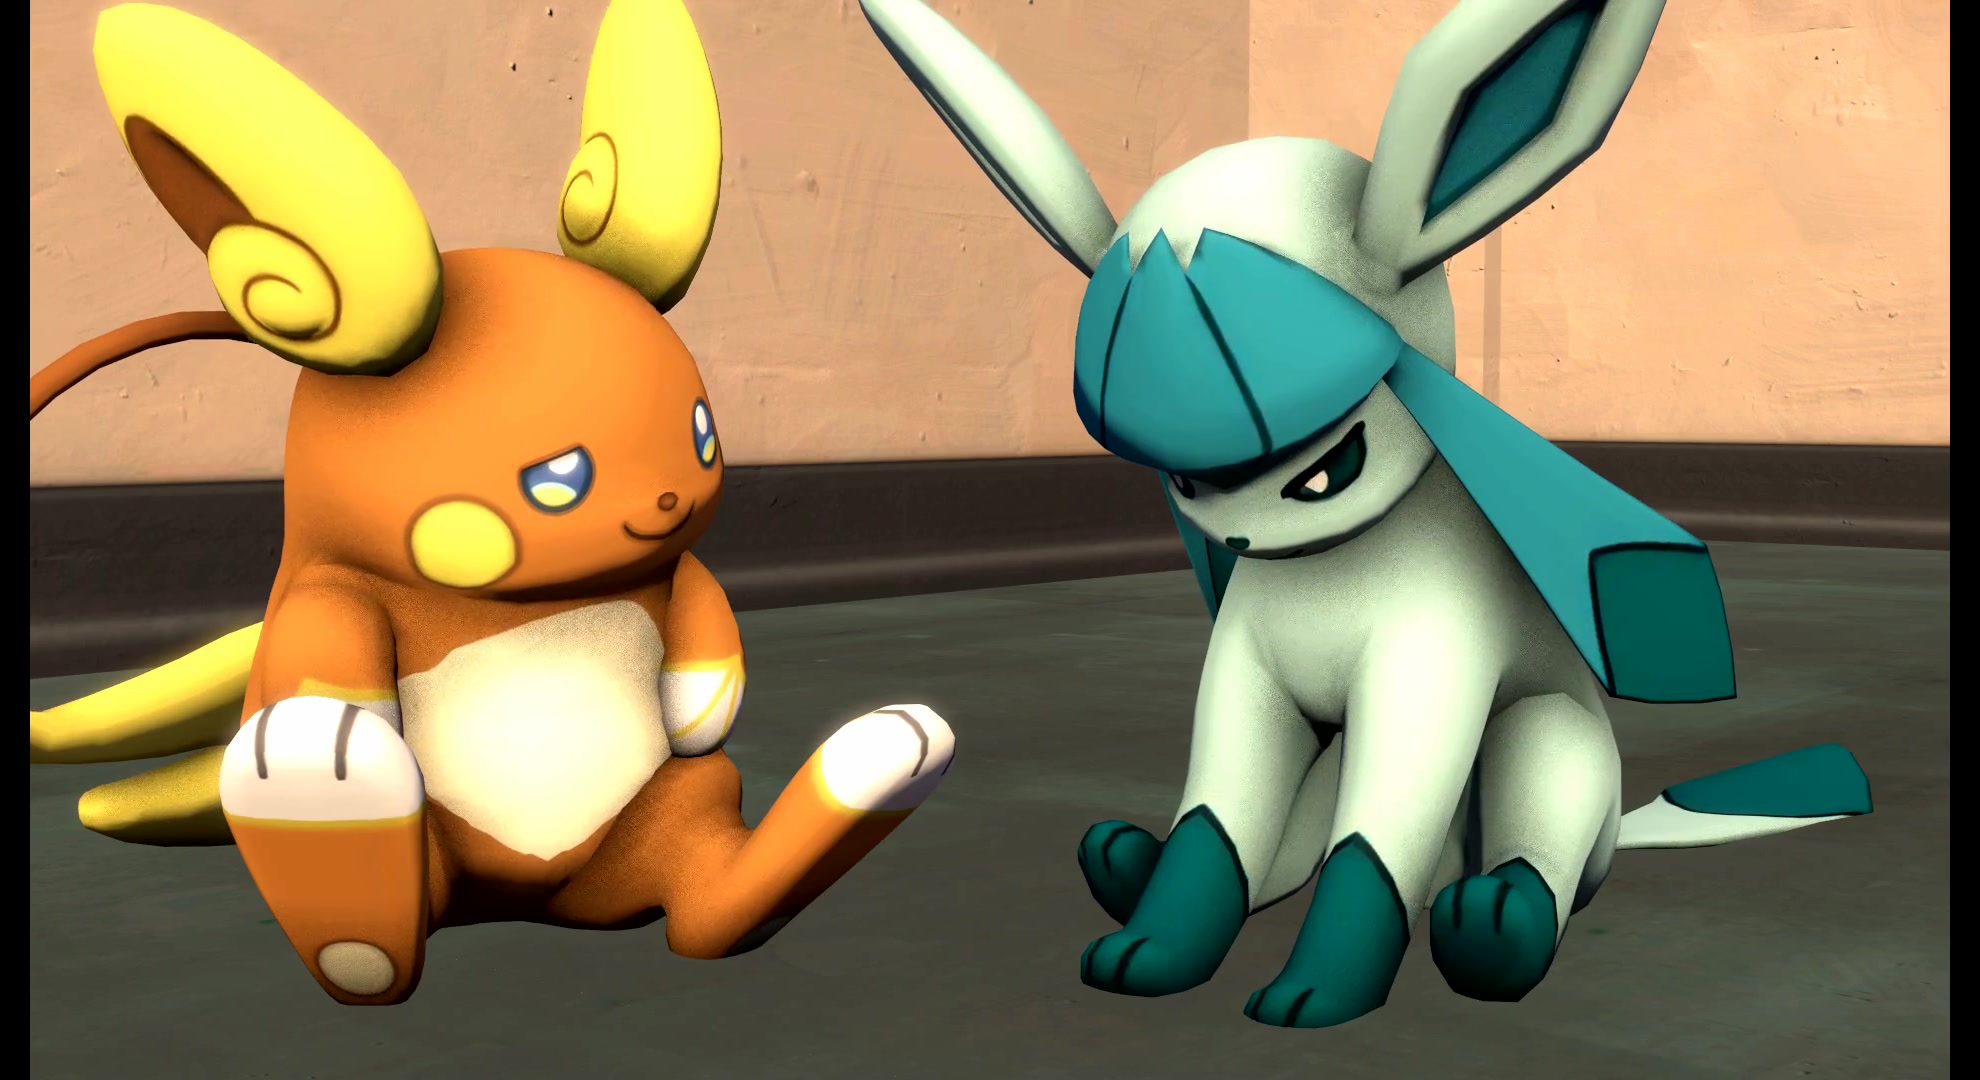 Glaceon's gassy play with Raichu